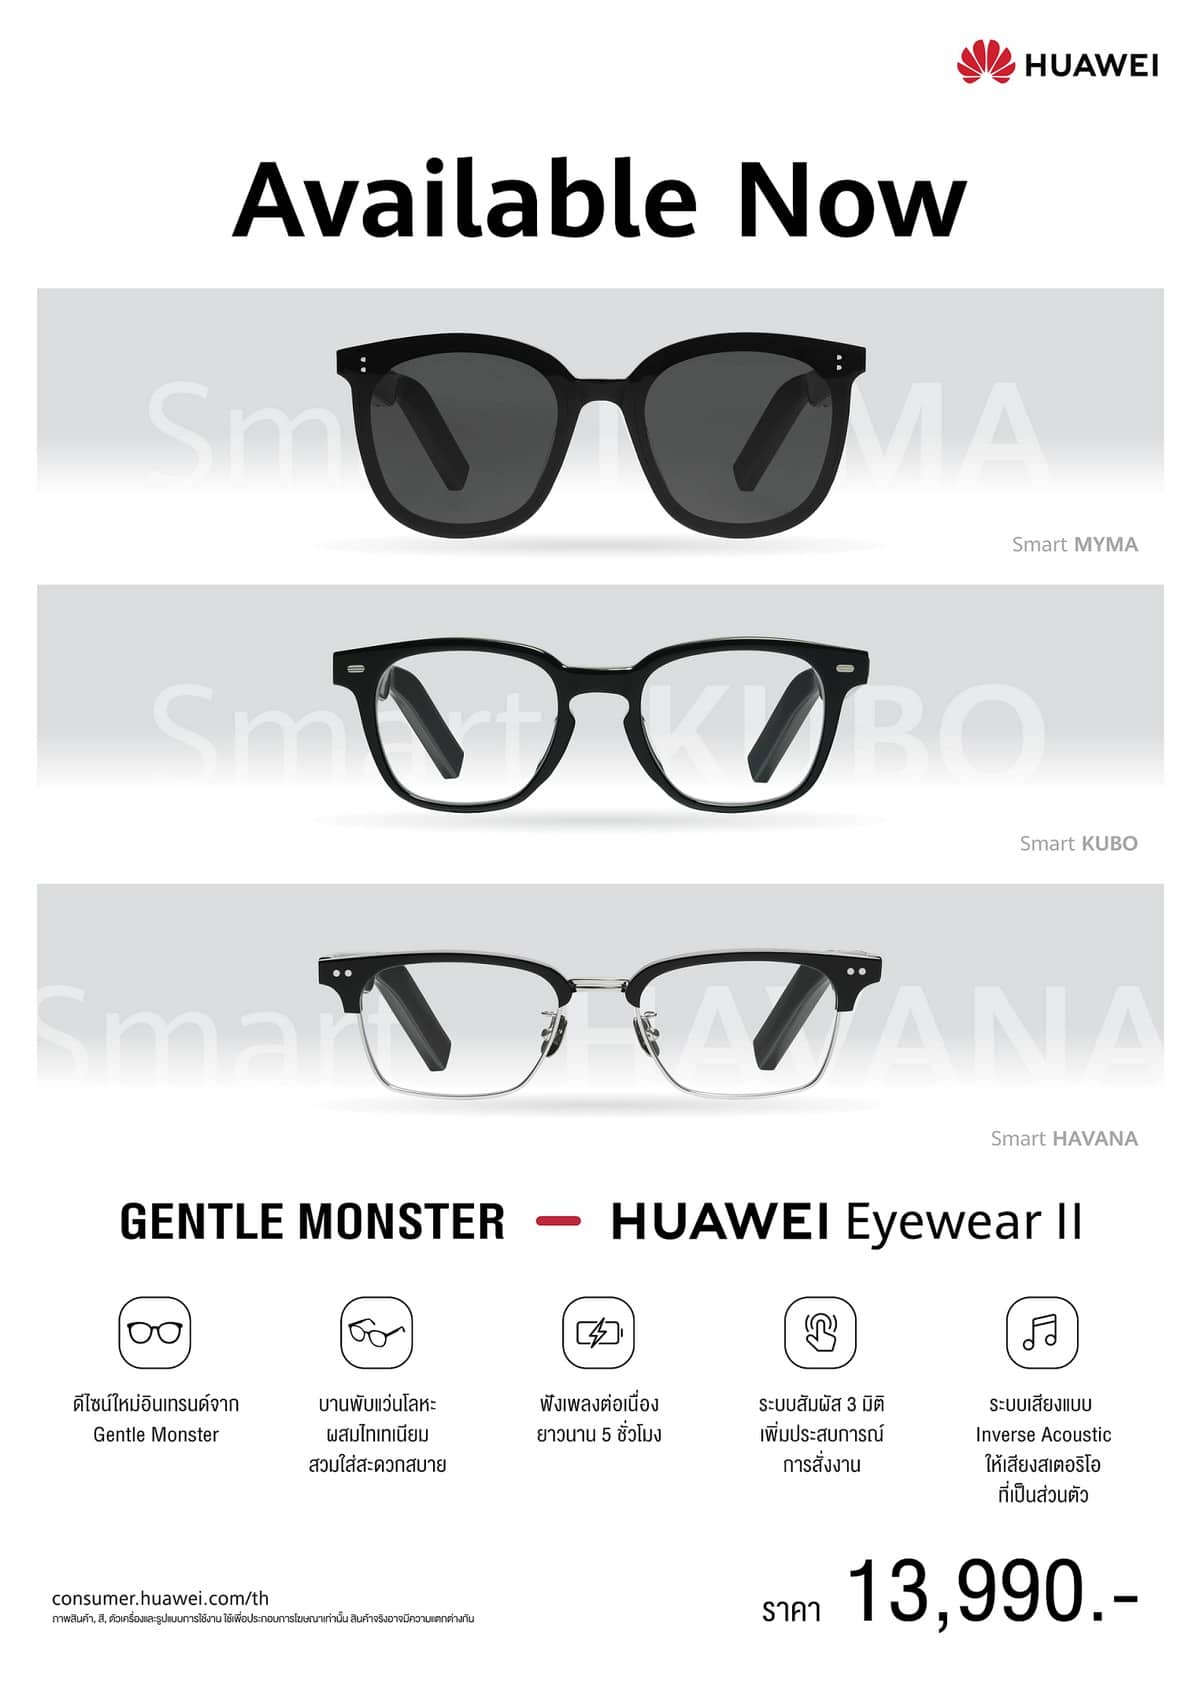 HUAWEI FreeBuds Pro - Gentle Monster II Available Now - ภาพที่ 27